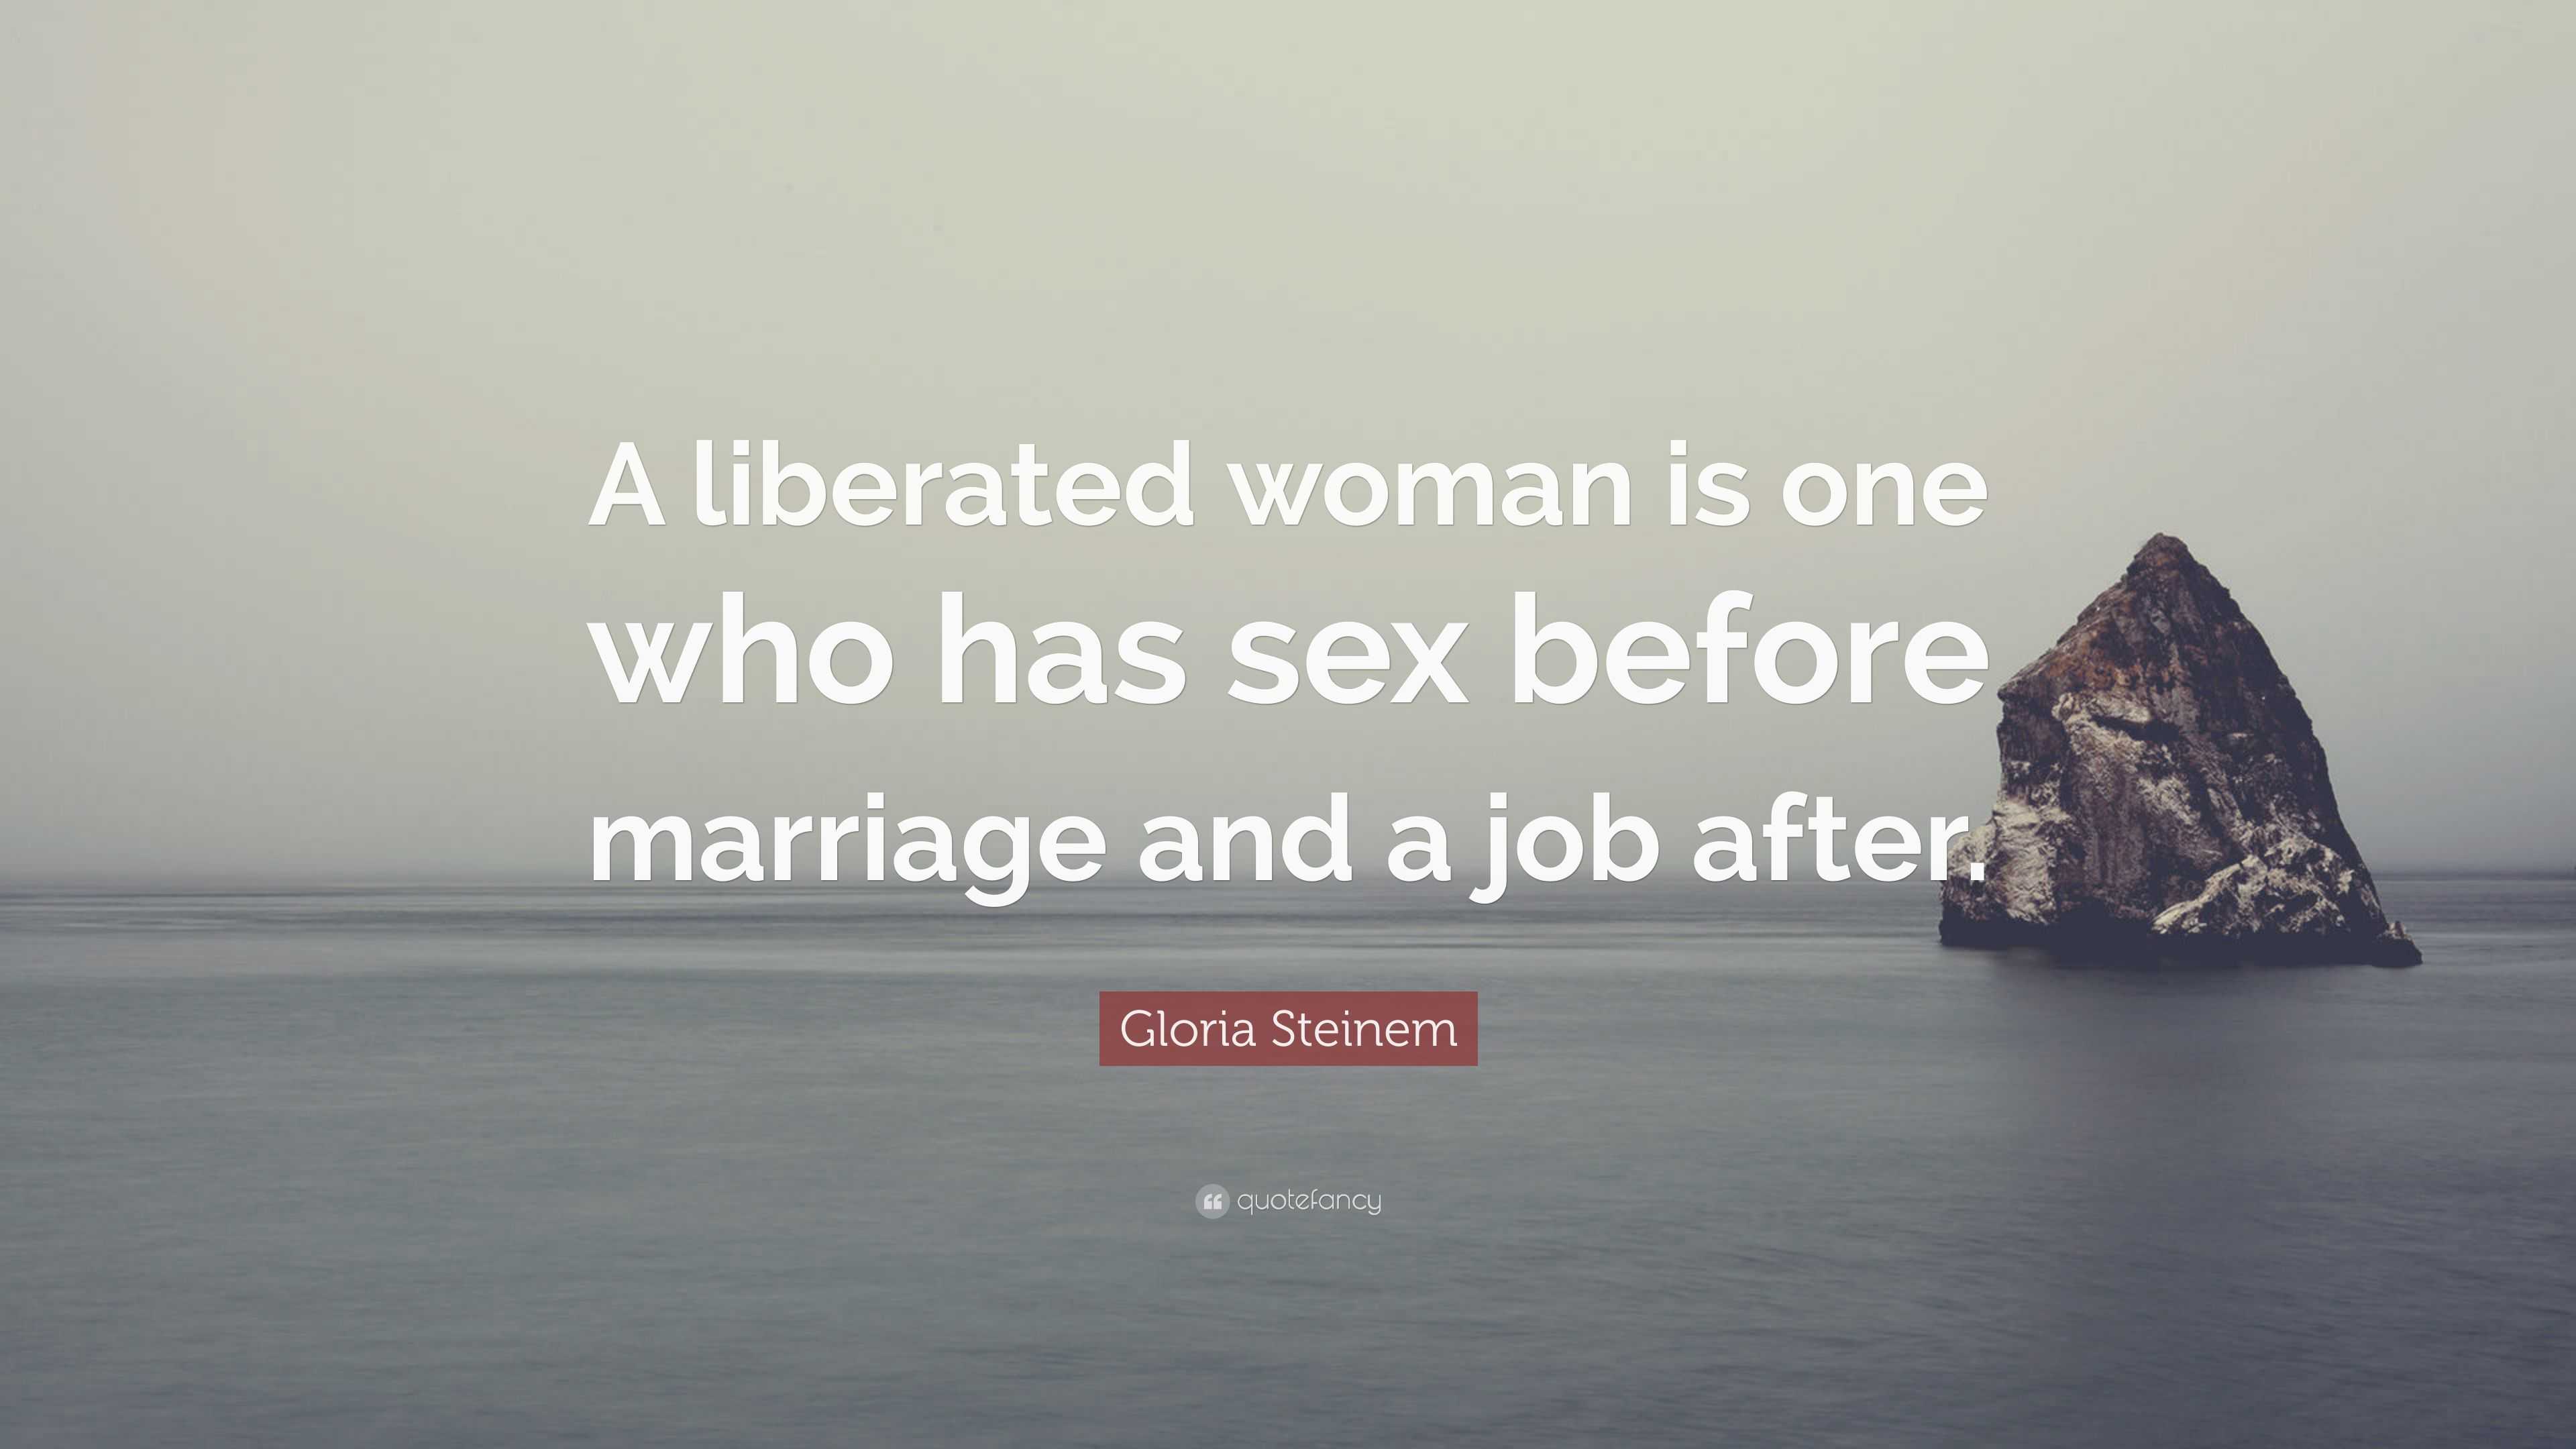 Gloria Steinem Quote “a Liberated Woman Is One Who Has Sex Before Marriage And A Job After” 